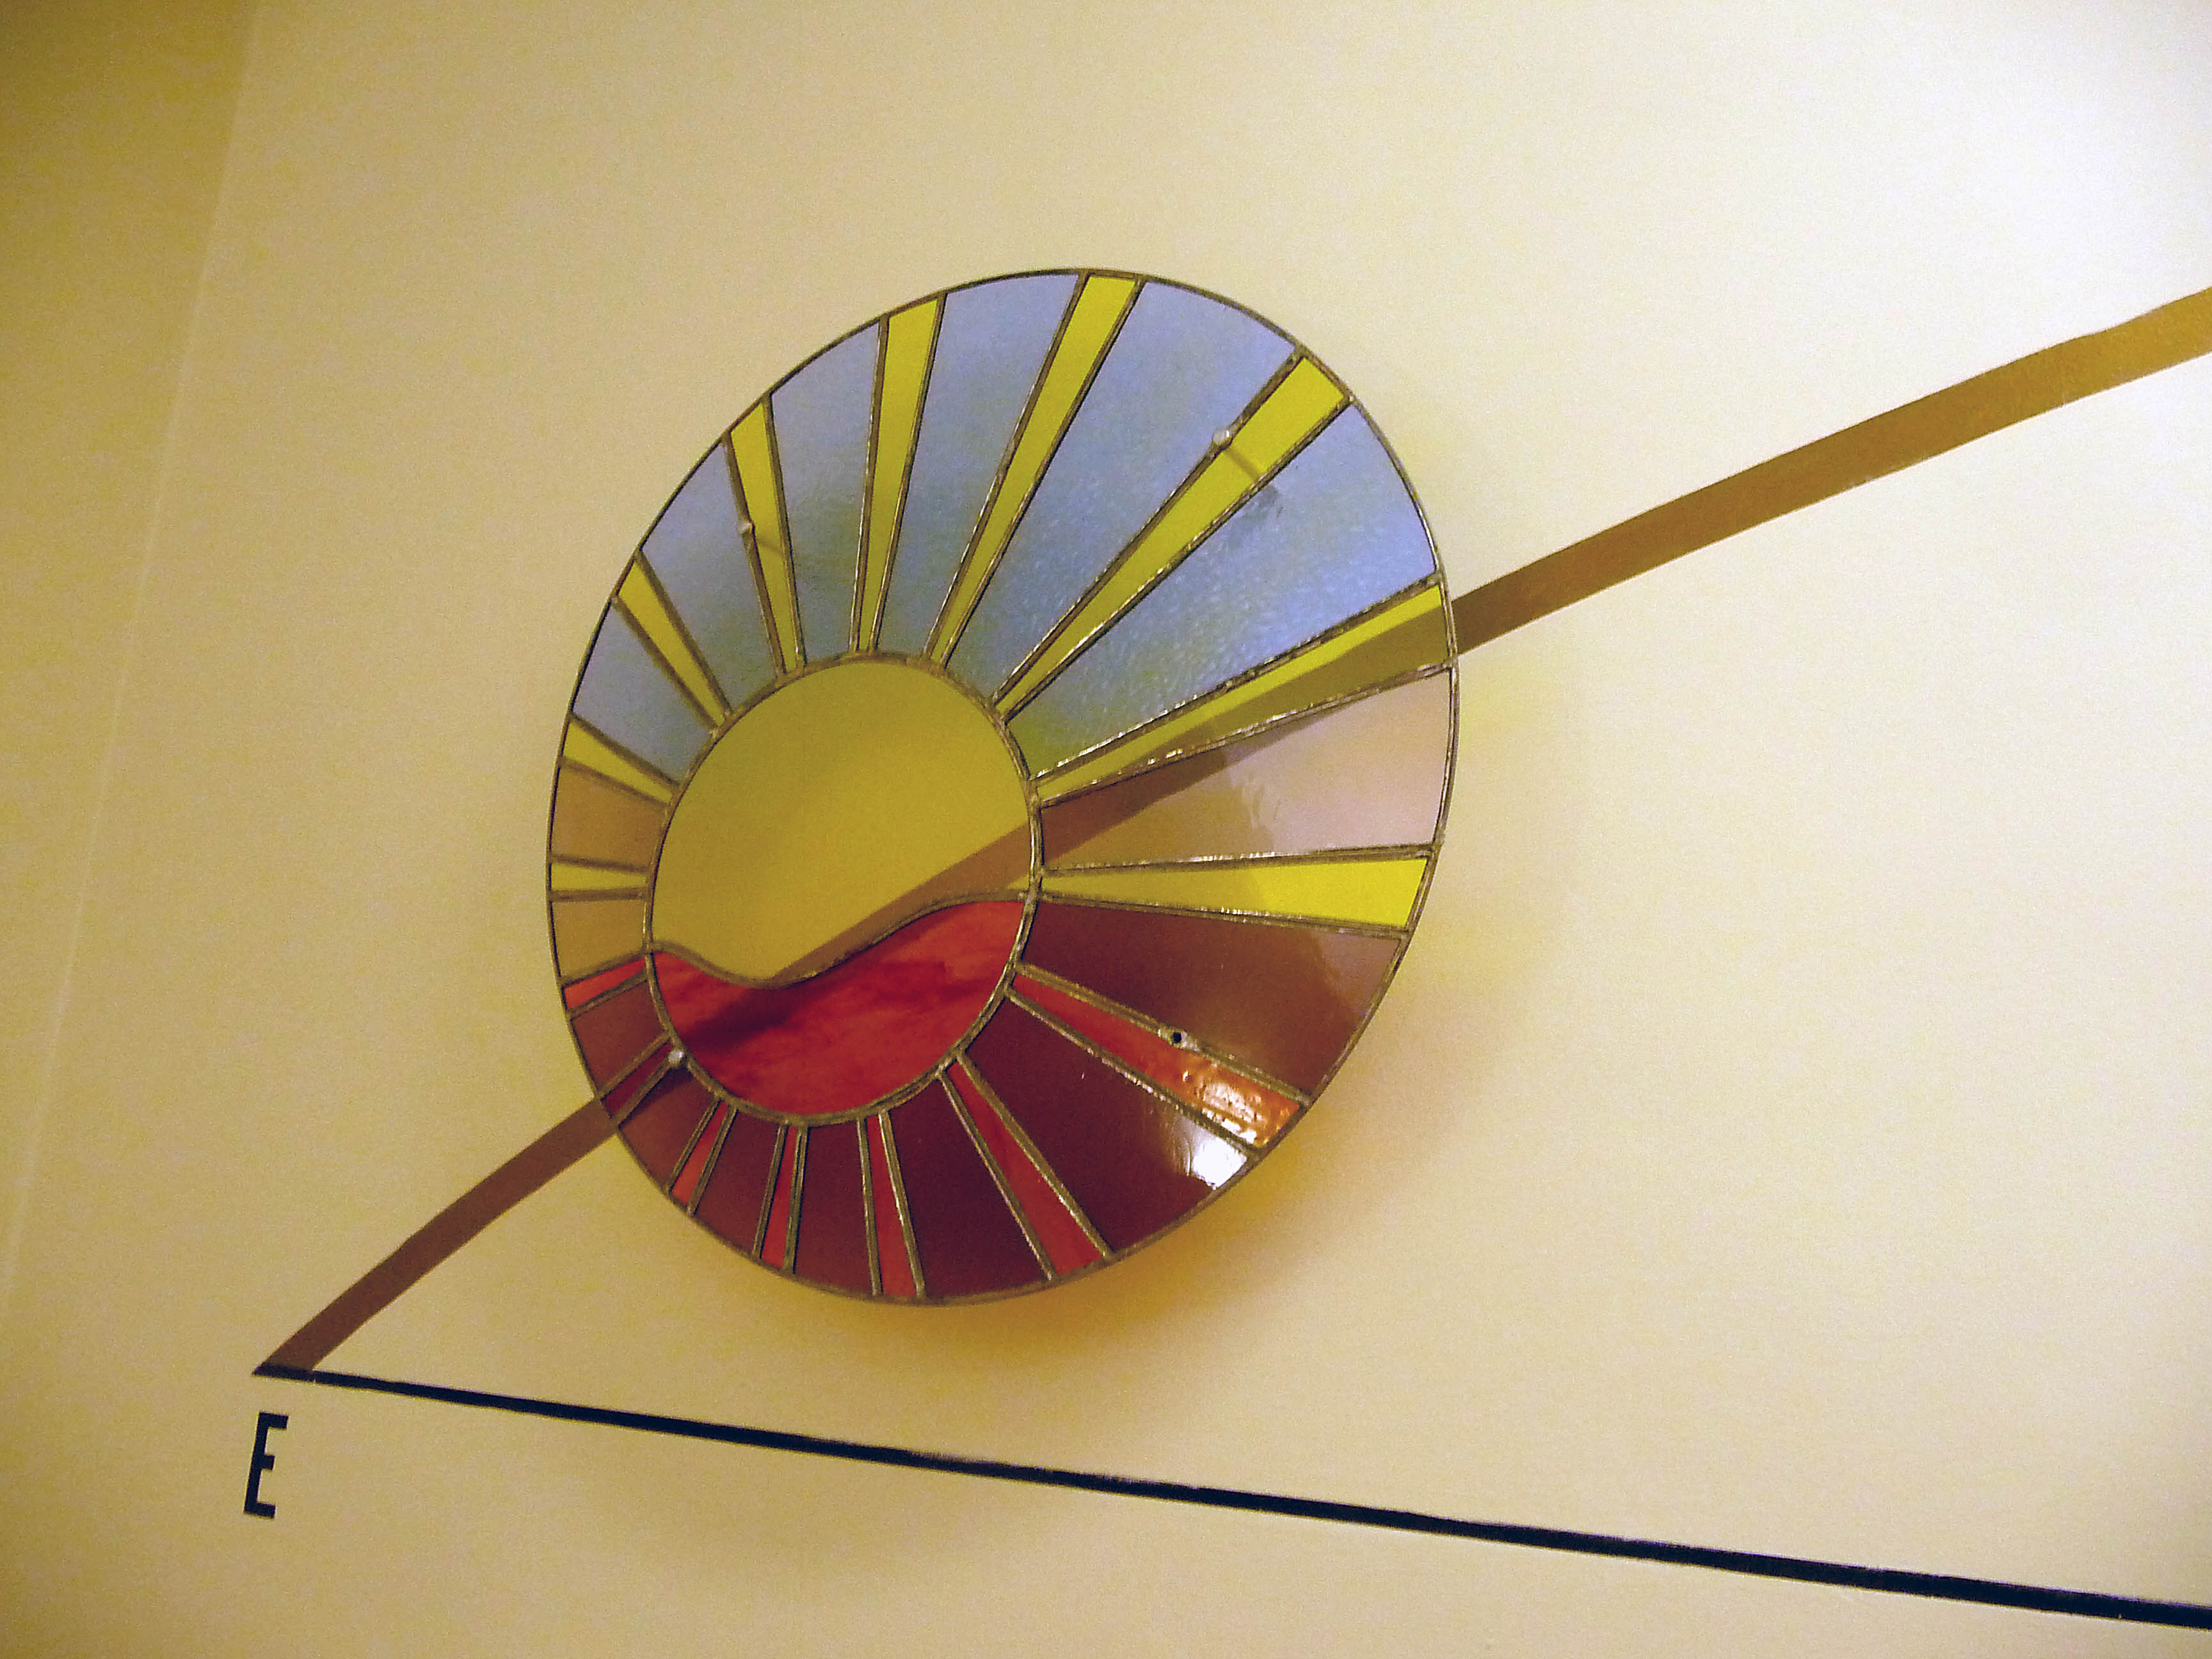 MOTIONS OF THE SUN (SUN RISE), 1998 by Alan Ditman, 1998, foiled stained glass, steel wire, paint